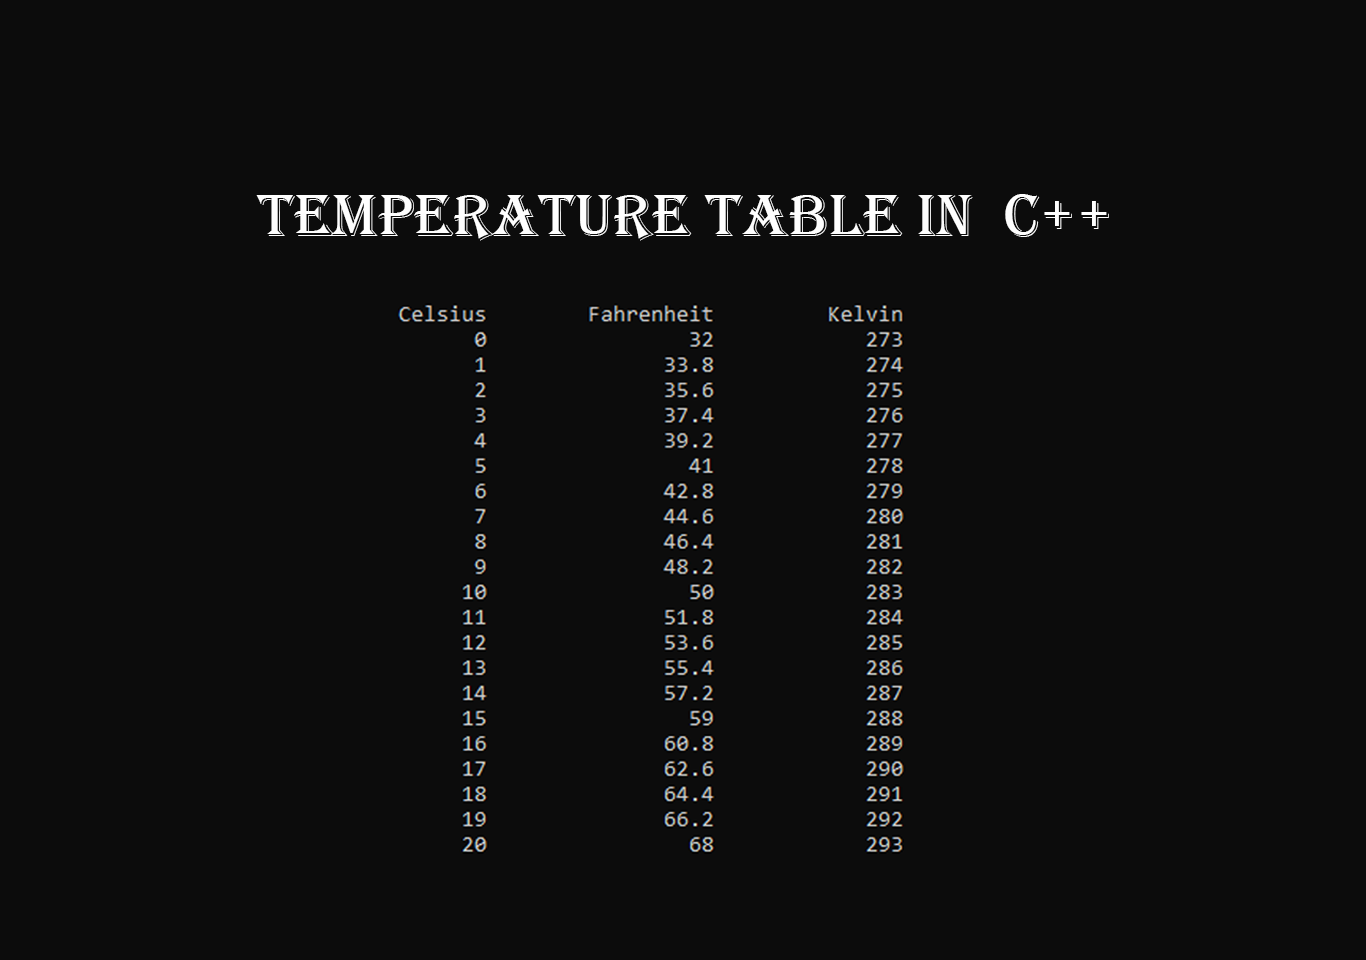 Temperature table in C++ with source code